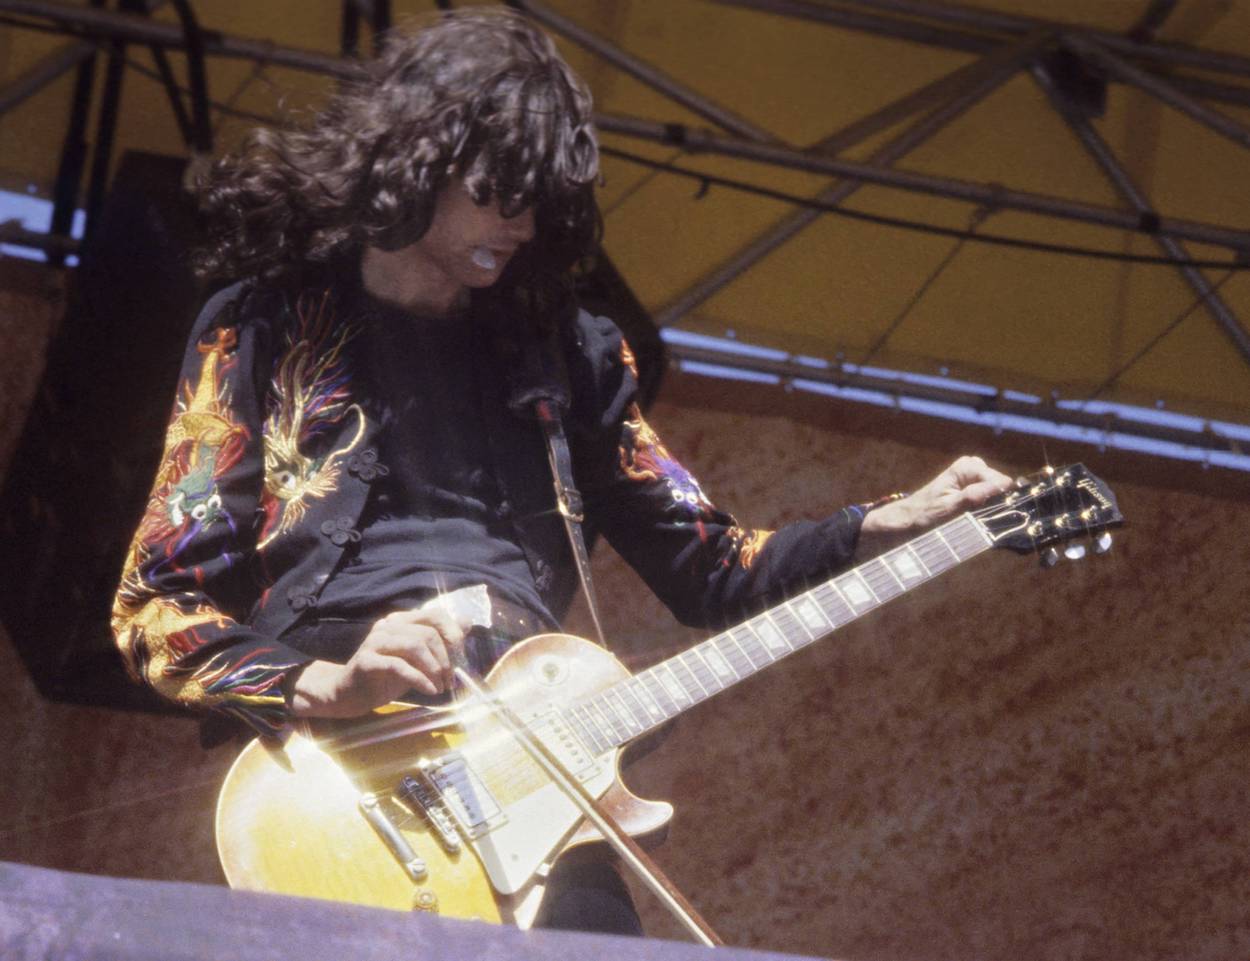 Jimmy Page plays during a 1977 Led Zeppelin concert in Oakland, California. Page tuned his guitar in a strange way when he first started playing.